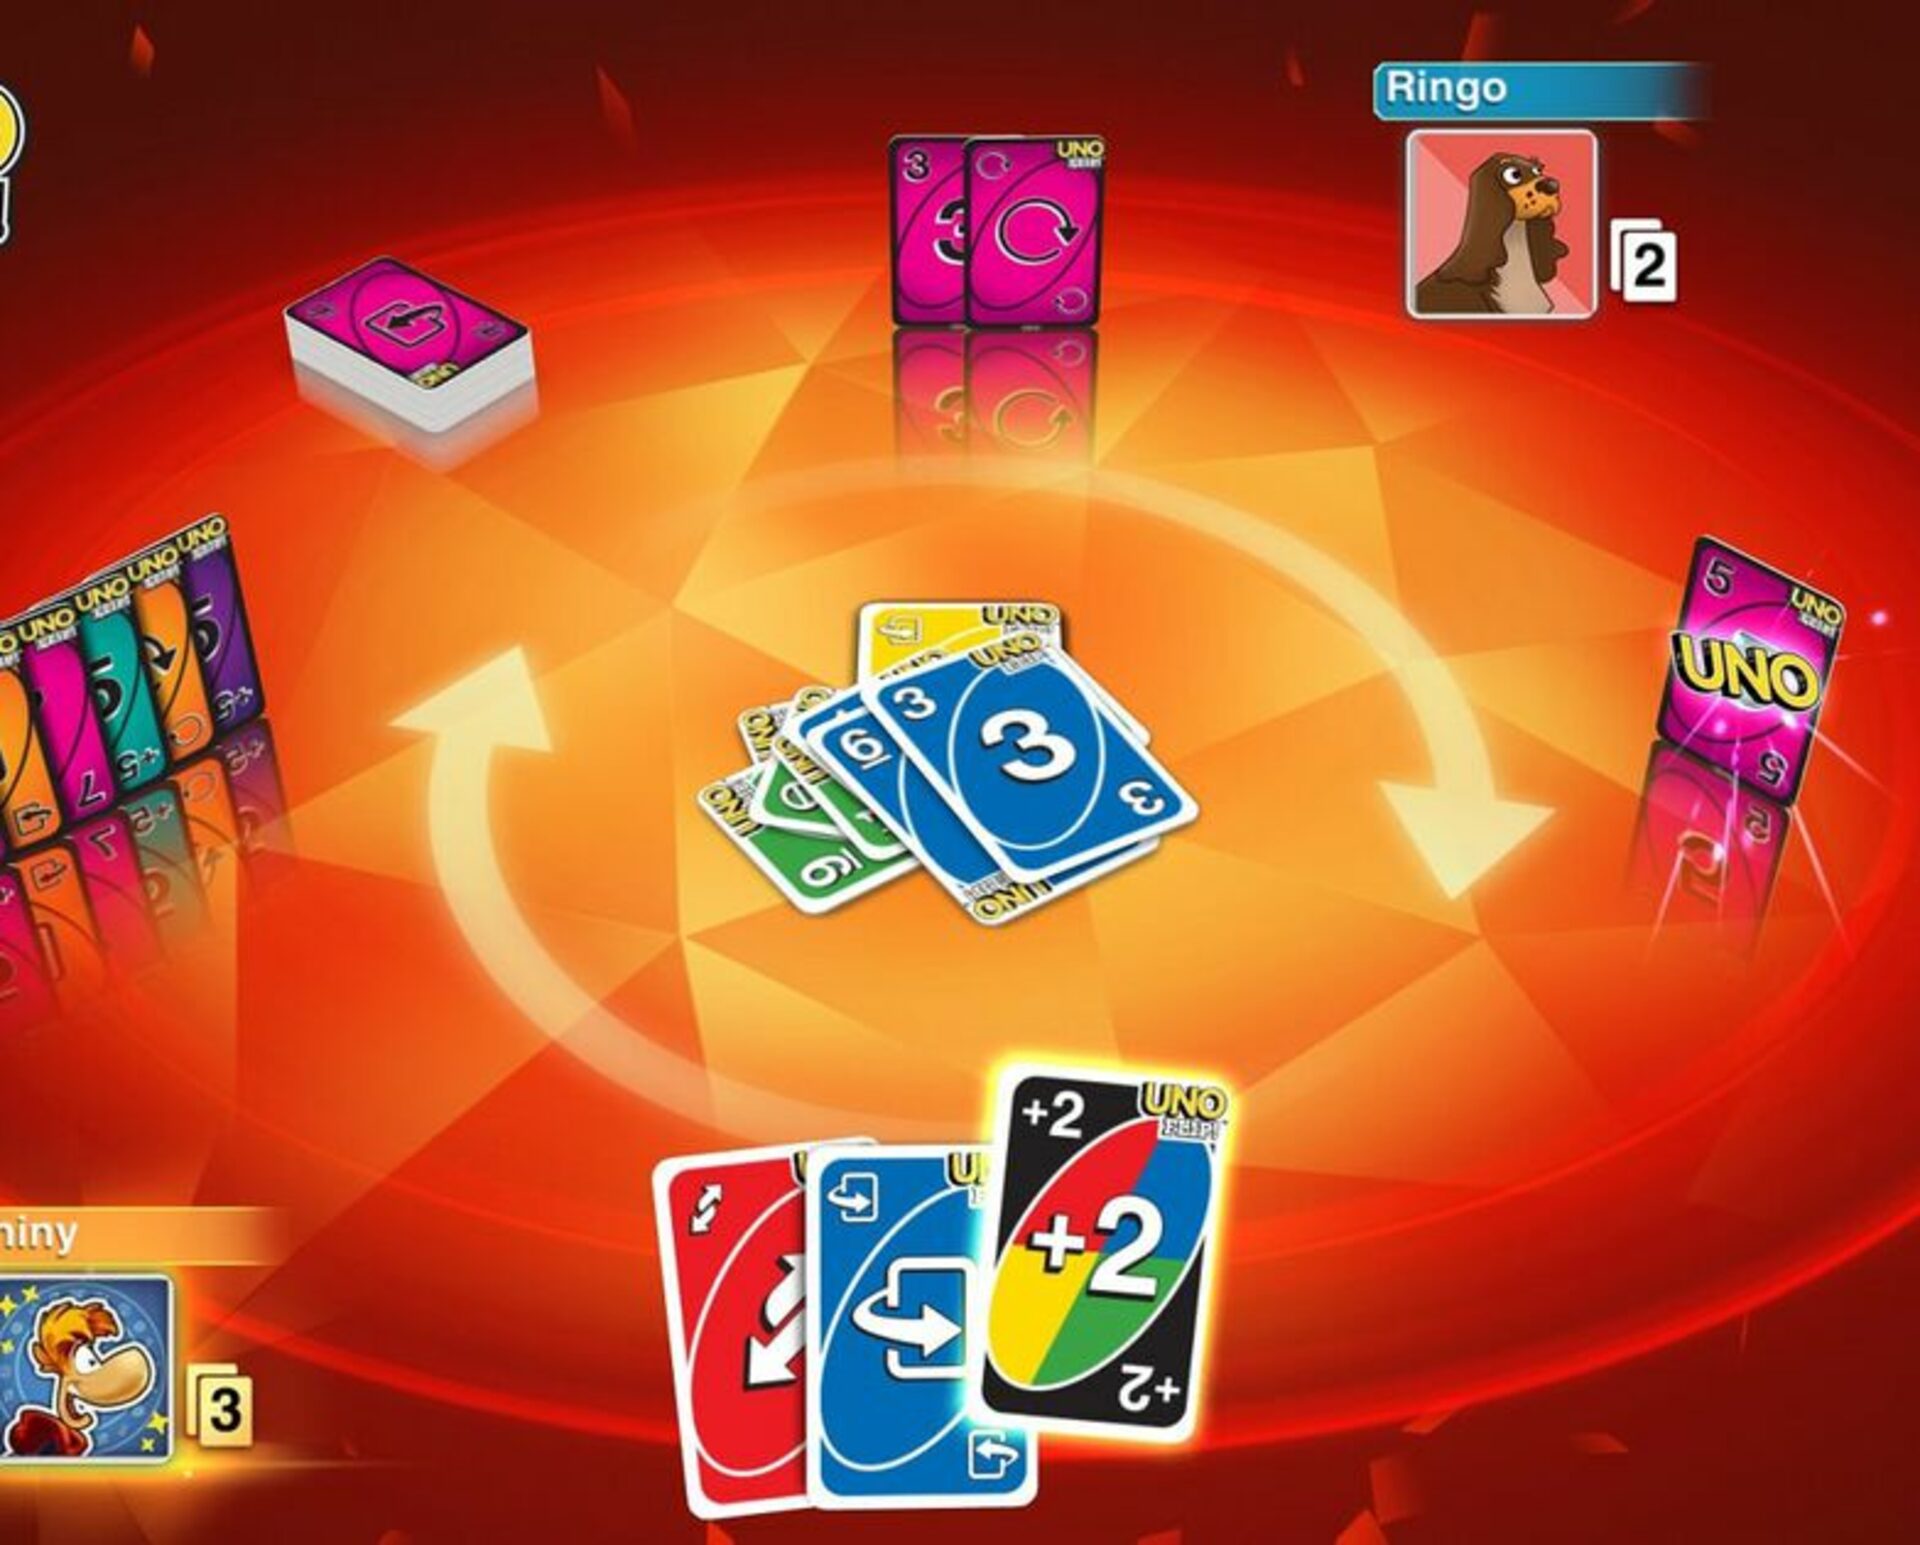 Buy UNO - Ultimate Edition PC Uplay key! Cheap price